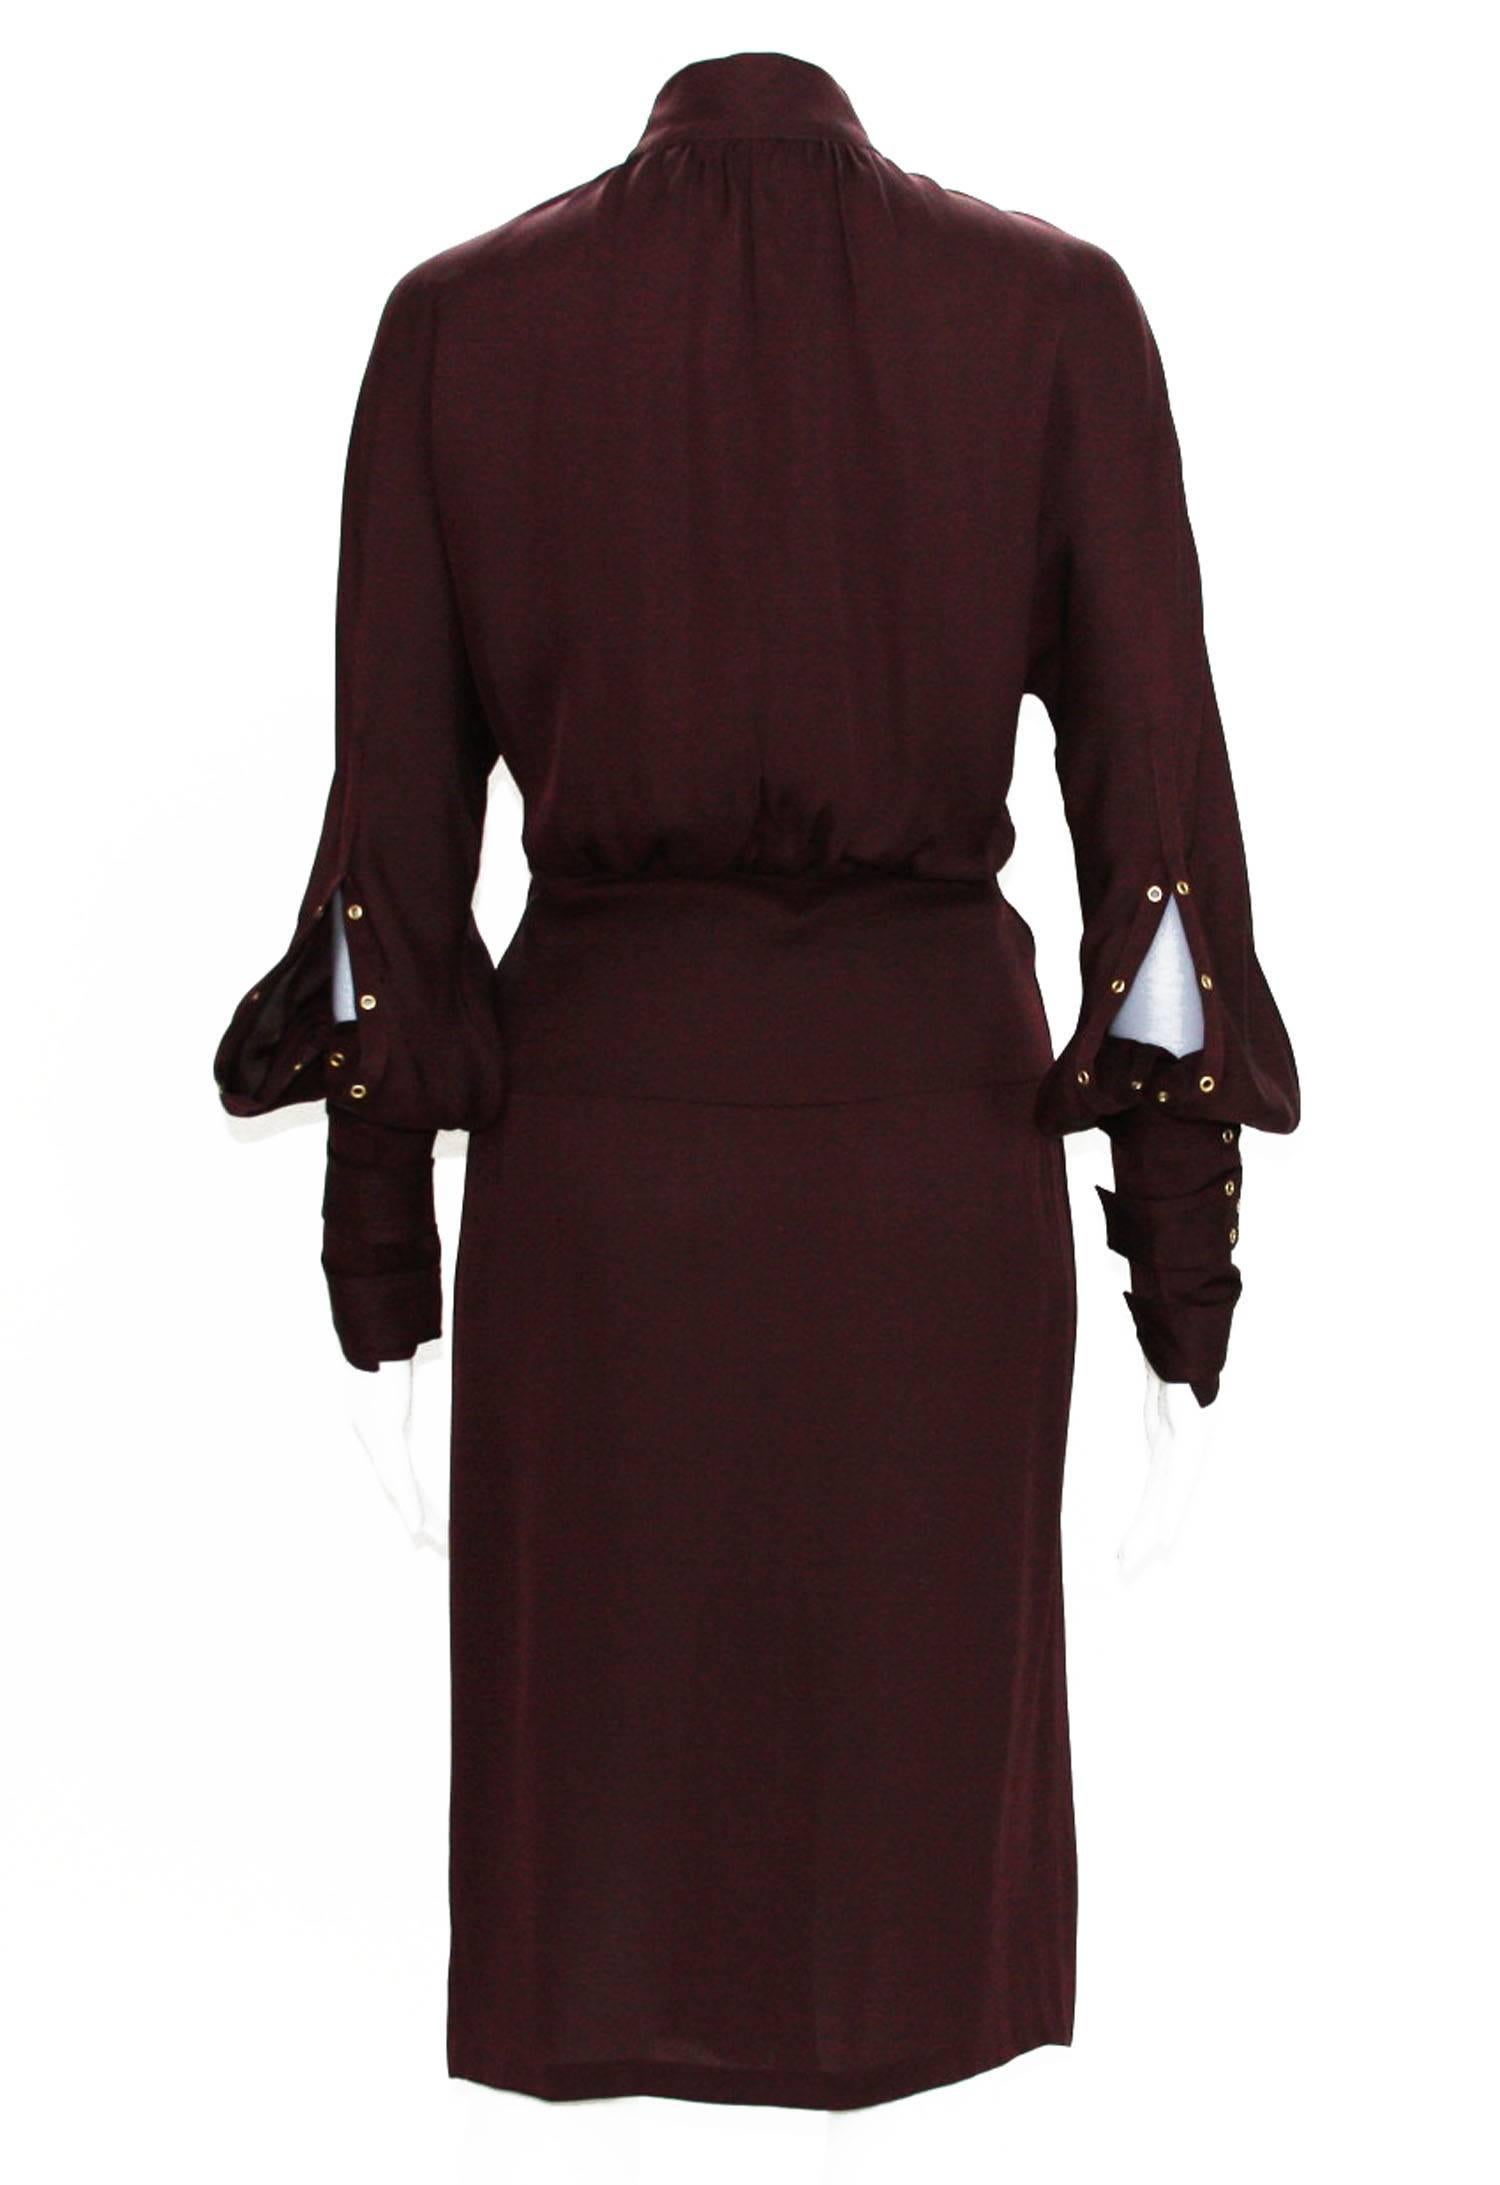 Black Tom Ford for Gucci 2003 Collection 3x Buckle Grommet Sleeve Burgundy Dress 40 -  For Sale